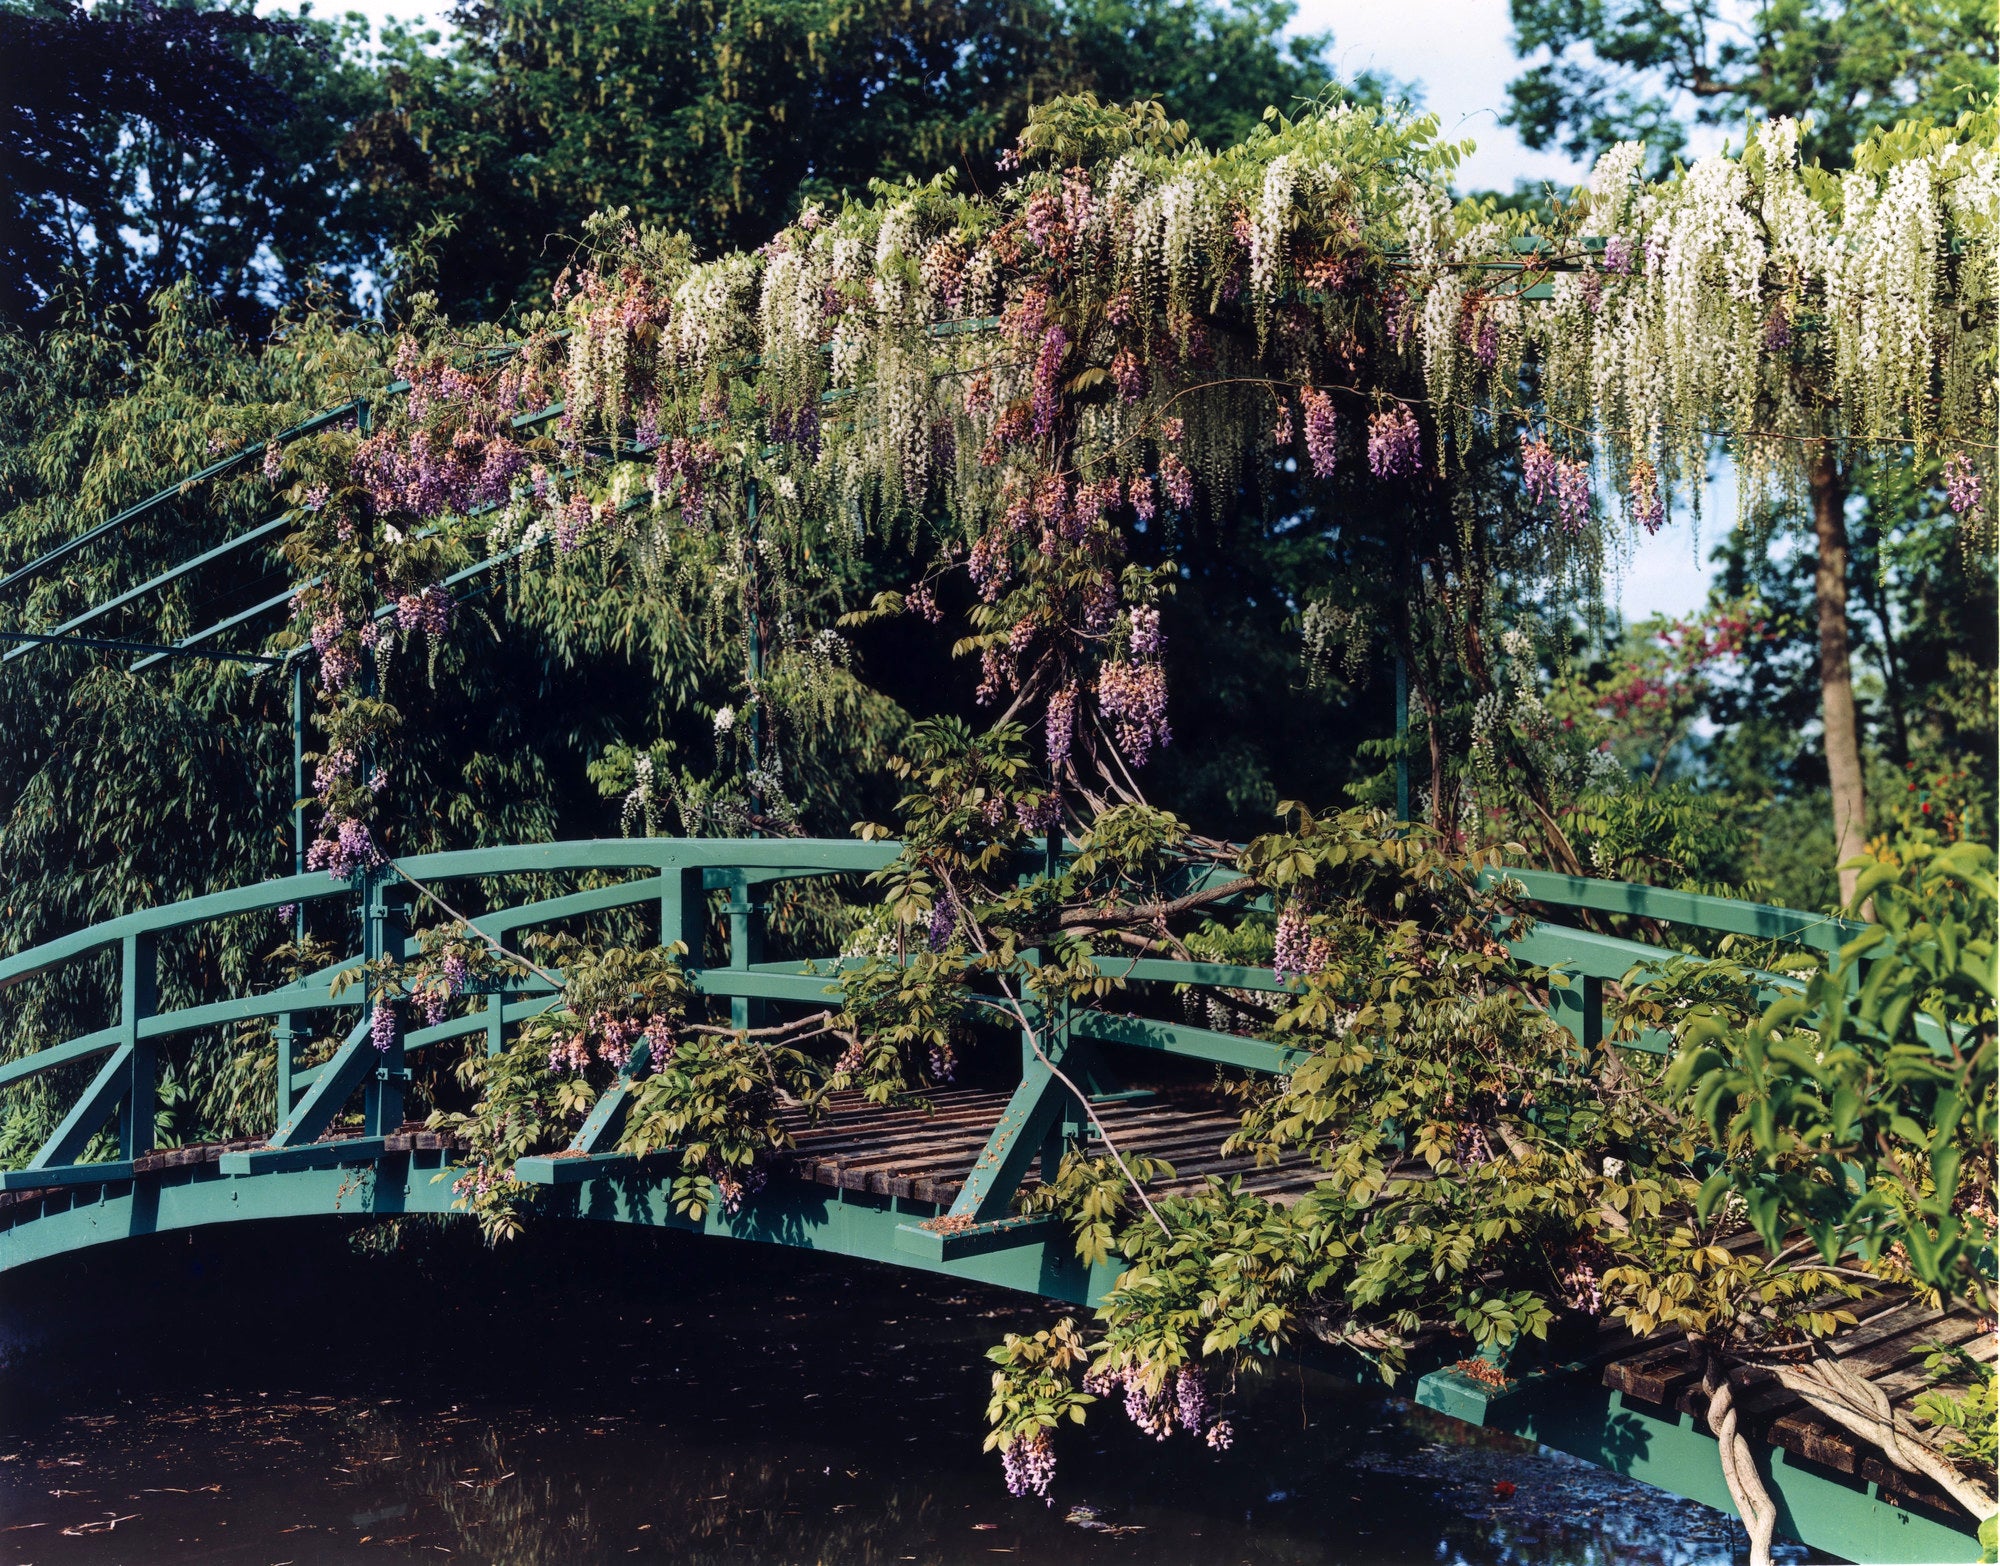 Stephen Shore — The Gardens At Giverny